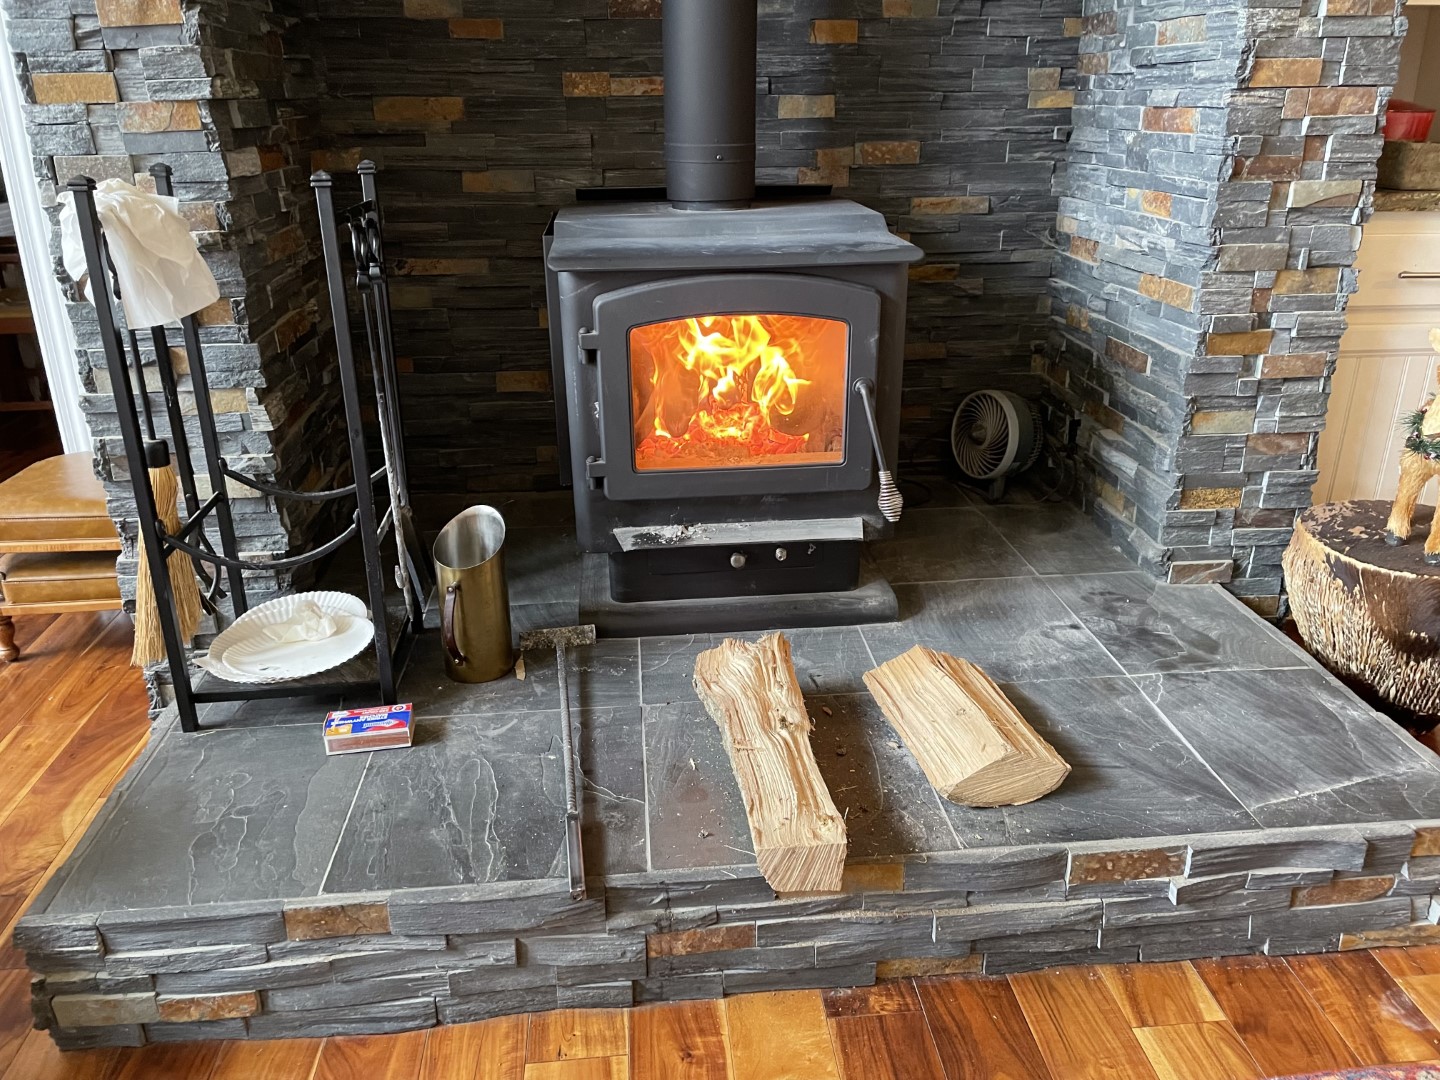 Clearances with Insert Wood Stove